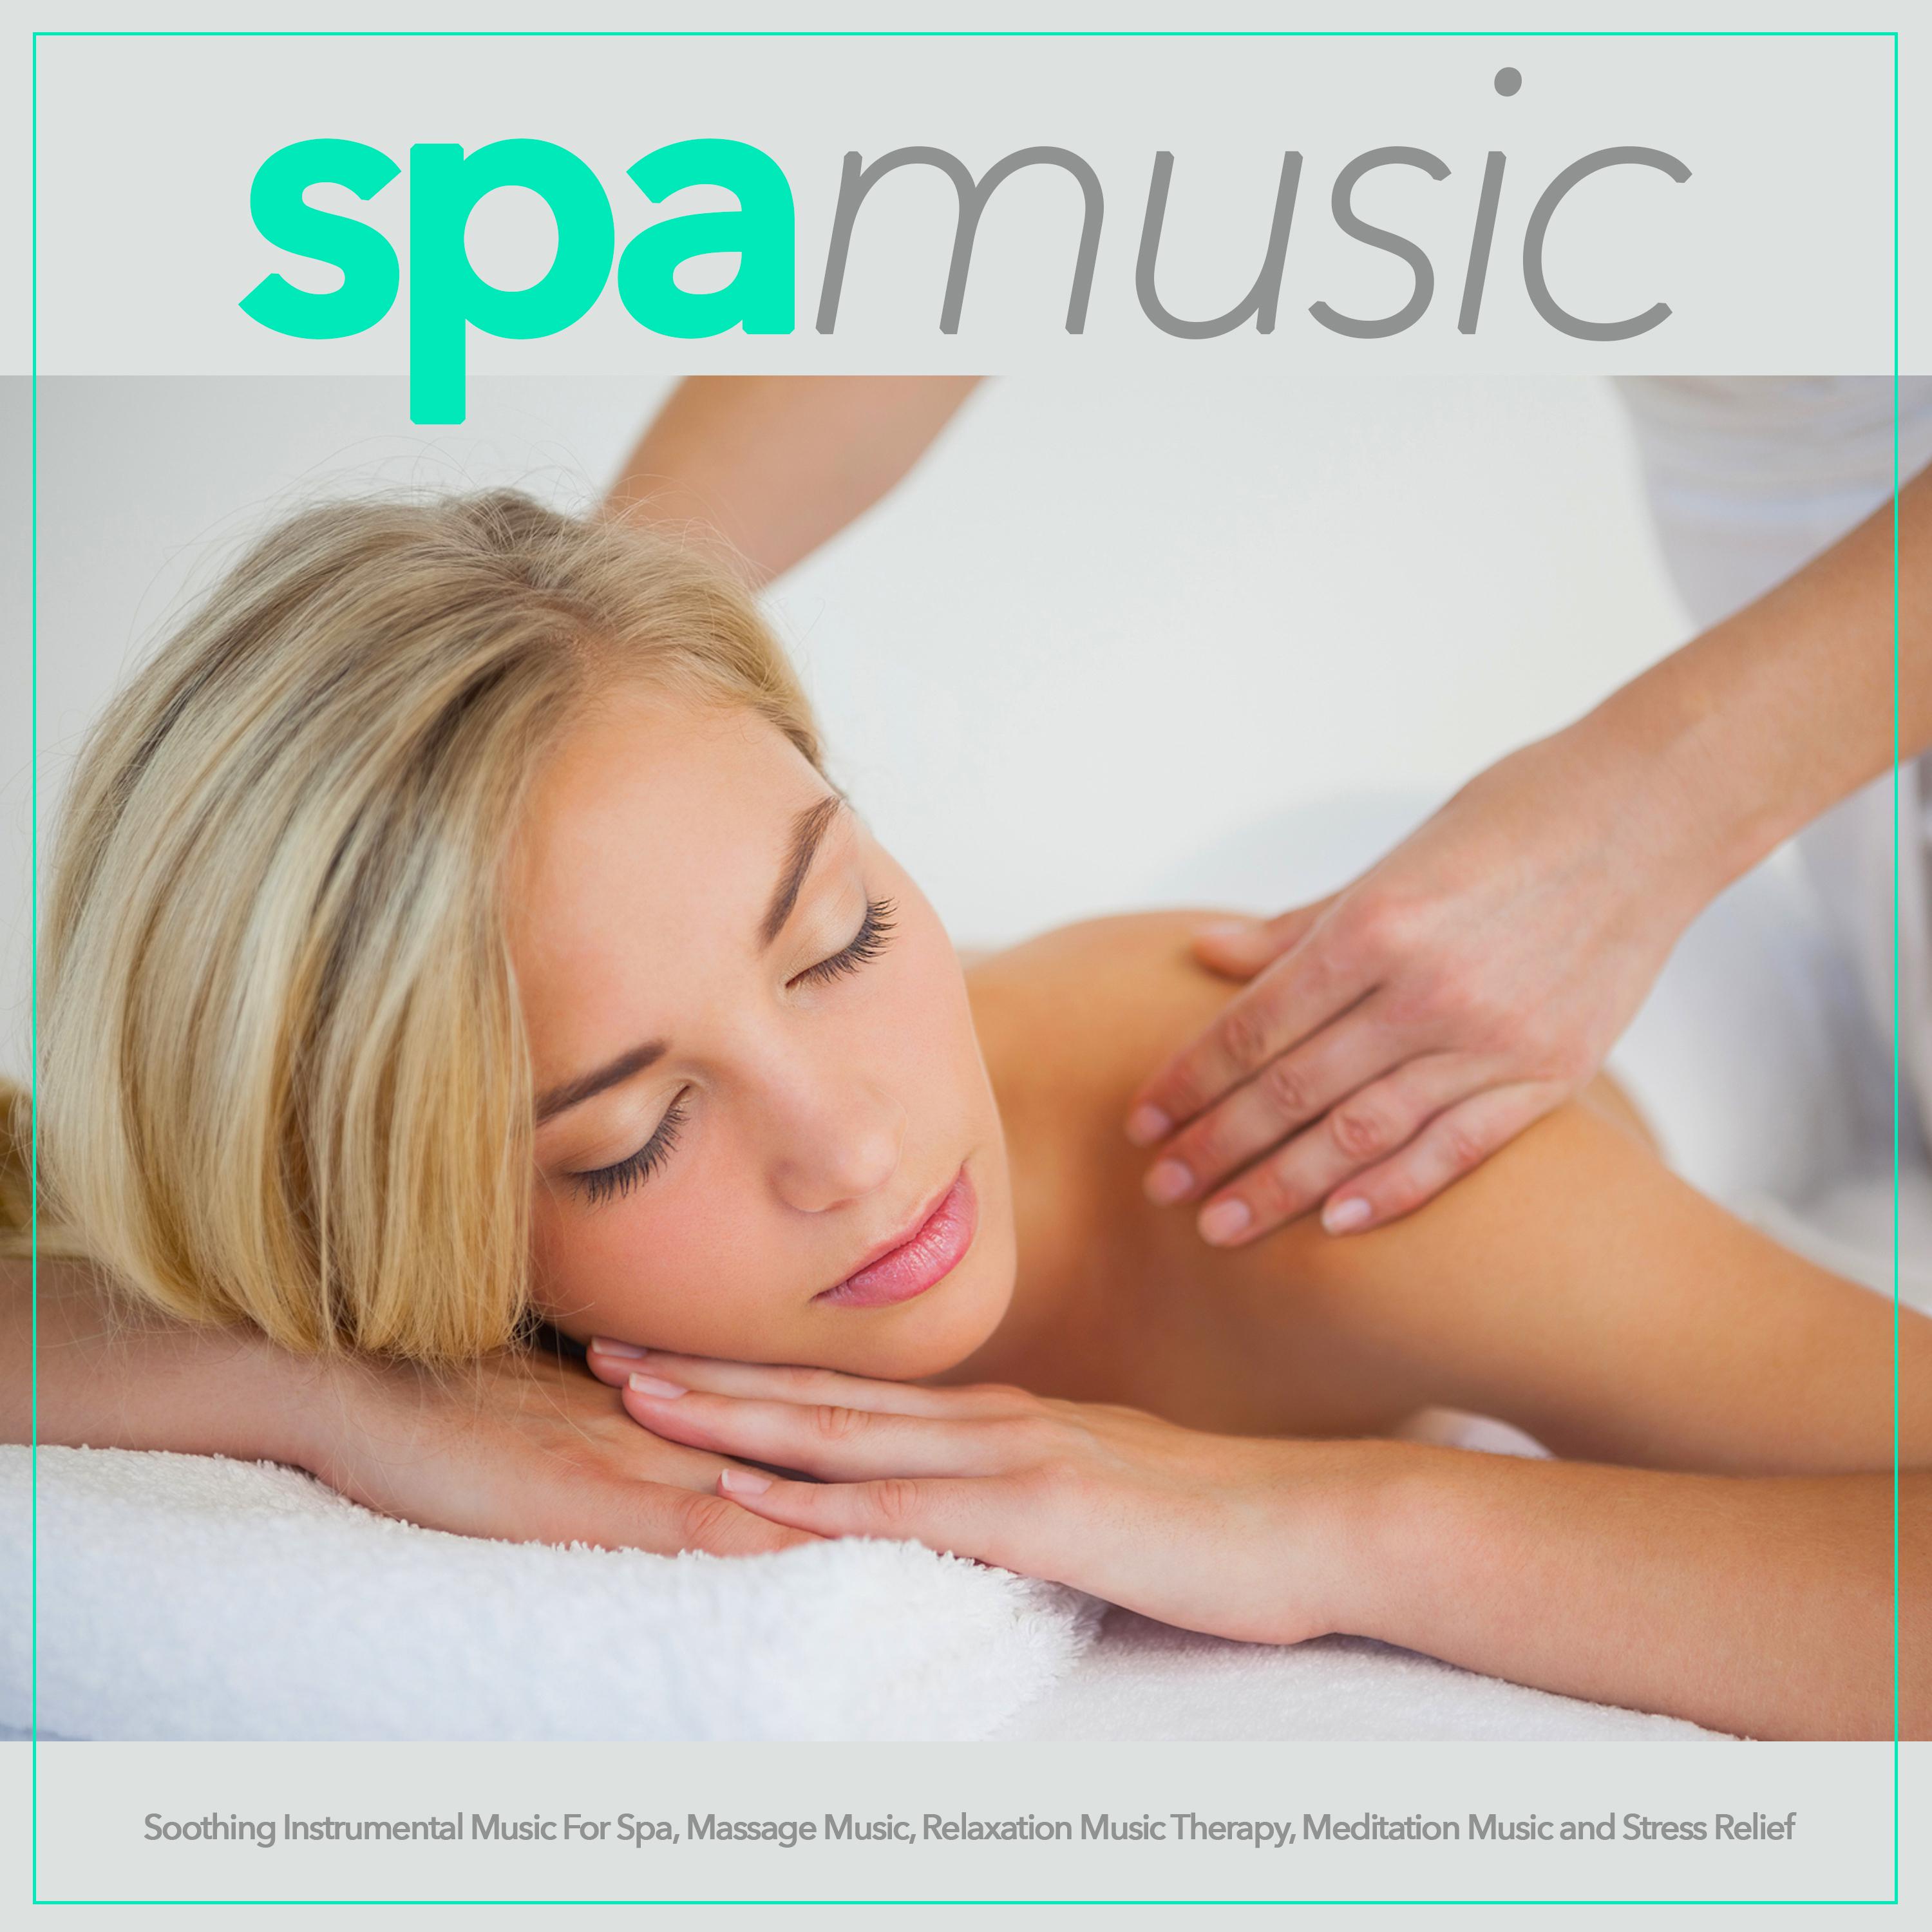 Soothing Music For Relaxation and Massage